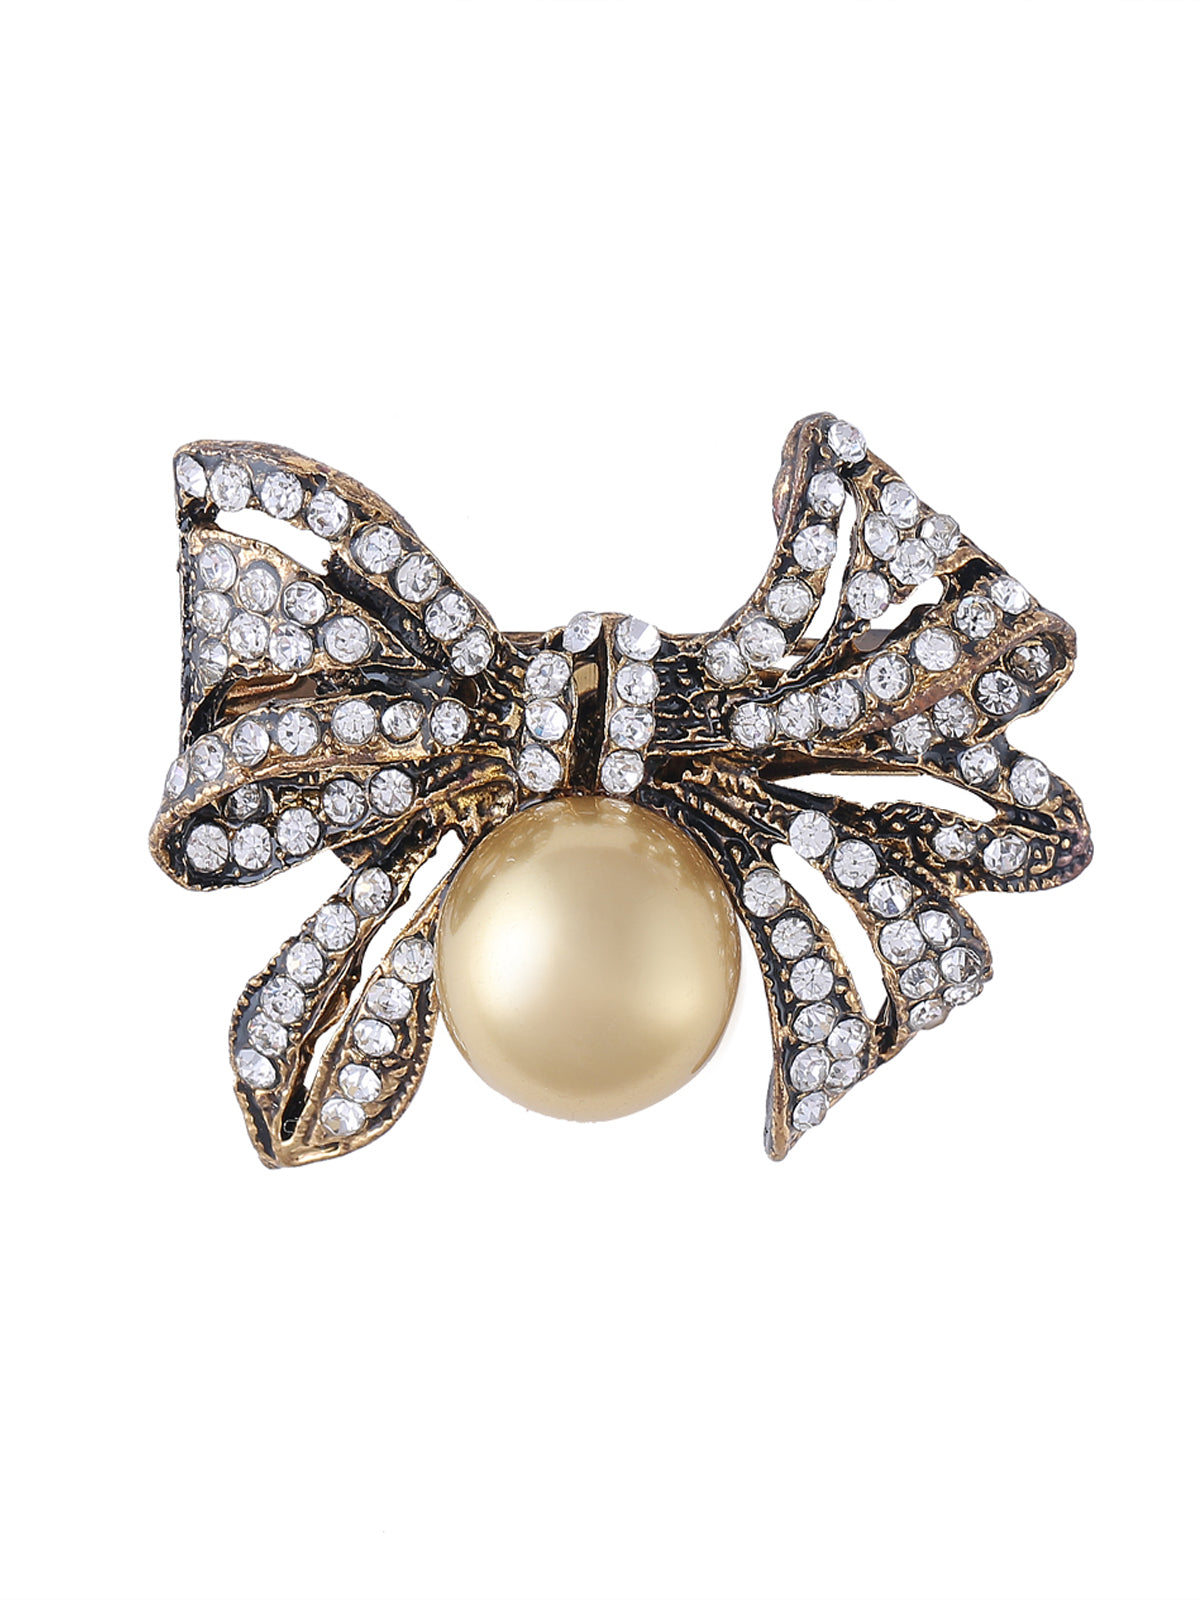 Diamond And Pearl Exquisite Brooch PinBow-Knot Design Diamond And Pearl Exquisite Brooch Pin